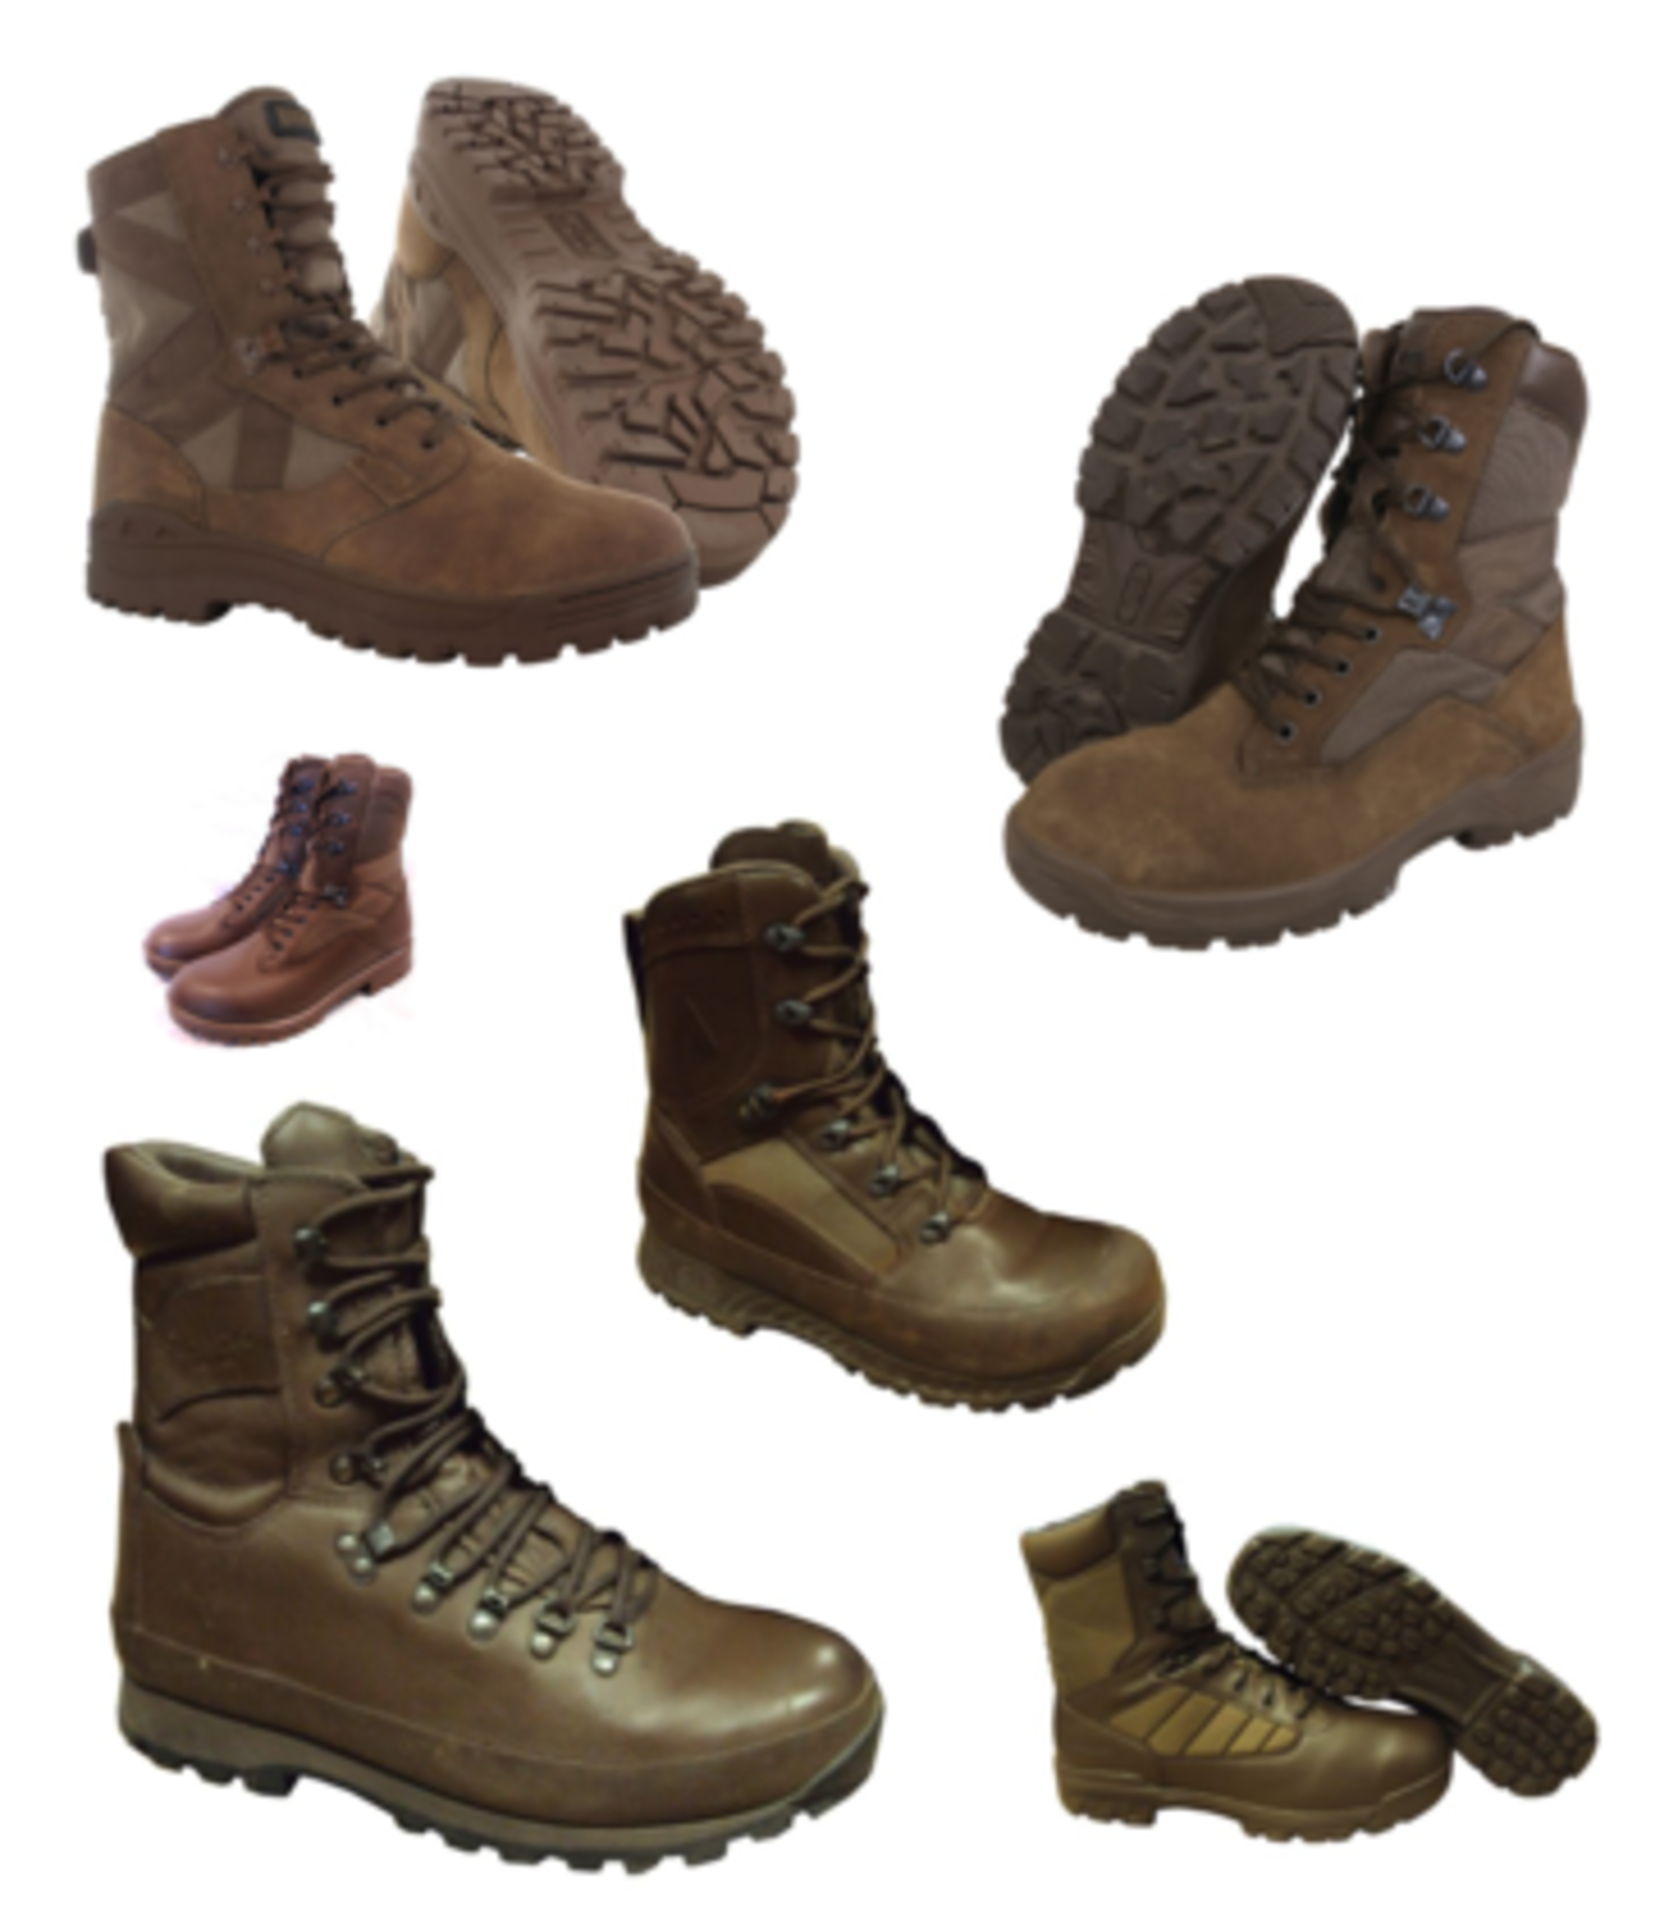 Pack of 10 - Mix of Brown Boots - Mix of Sizes - Grade 1